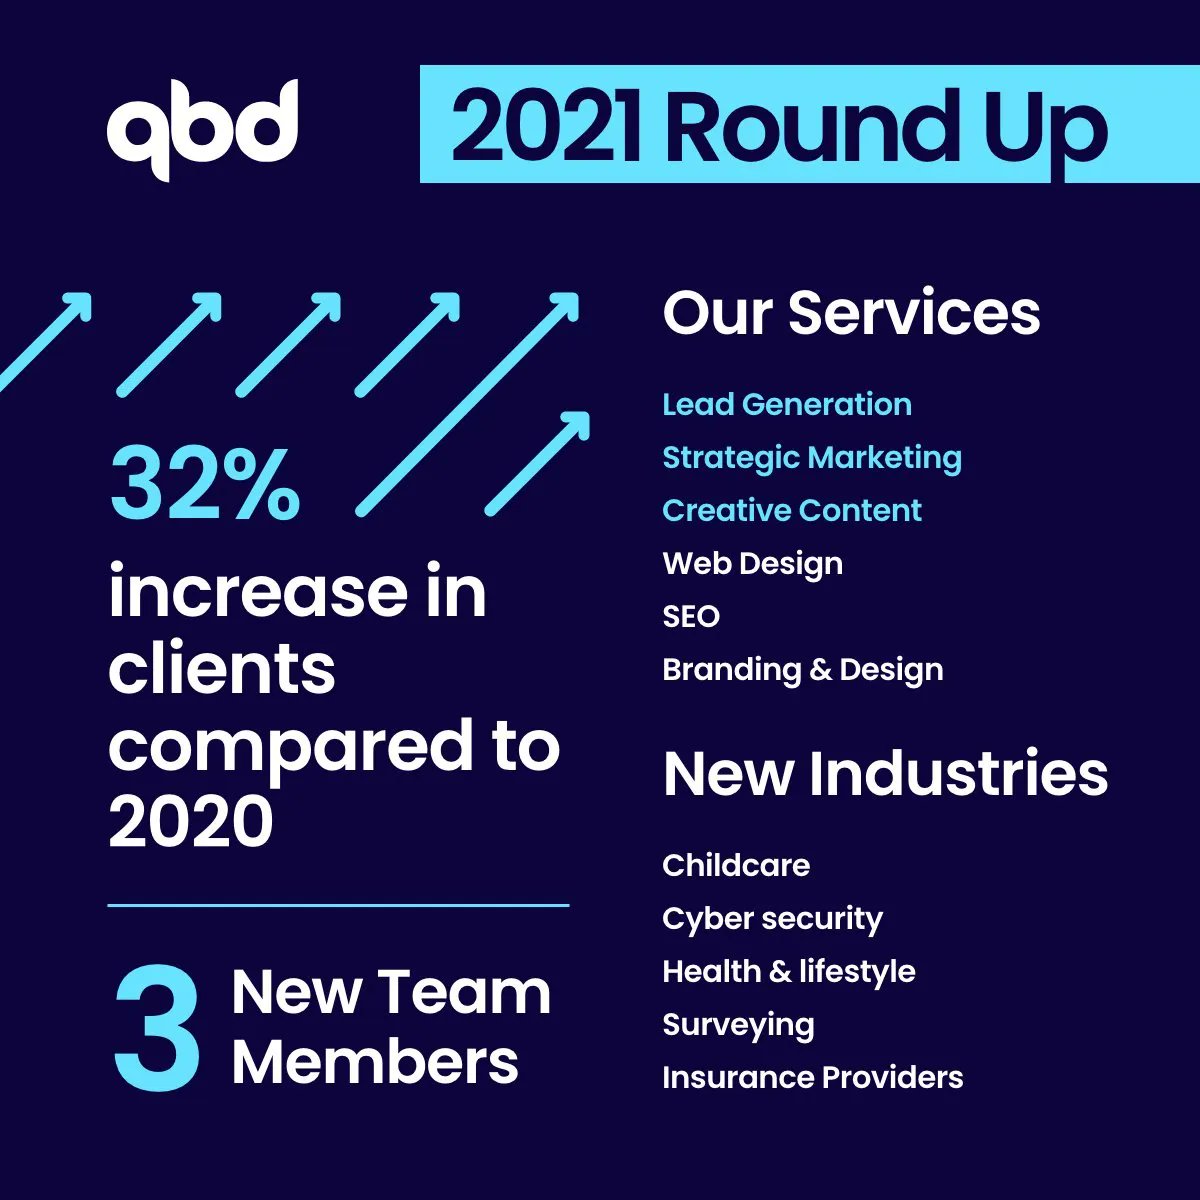 Last week we saw the release of Spotify Wrapped 2021, so here's our own round up of the last year!

With a 32% increase in clients over the past year we've seen huge growth as a business both internally and externally.

#solihullhour https://t.co/XbKX6crK0u